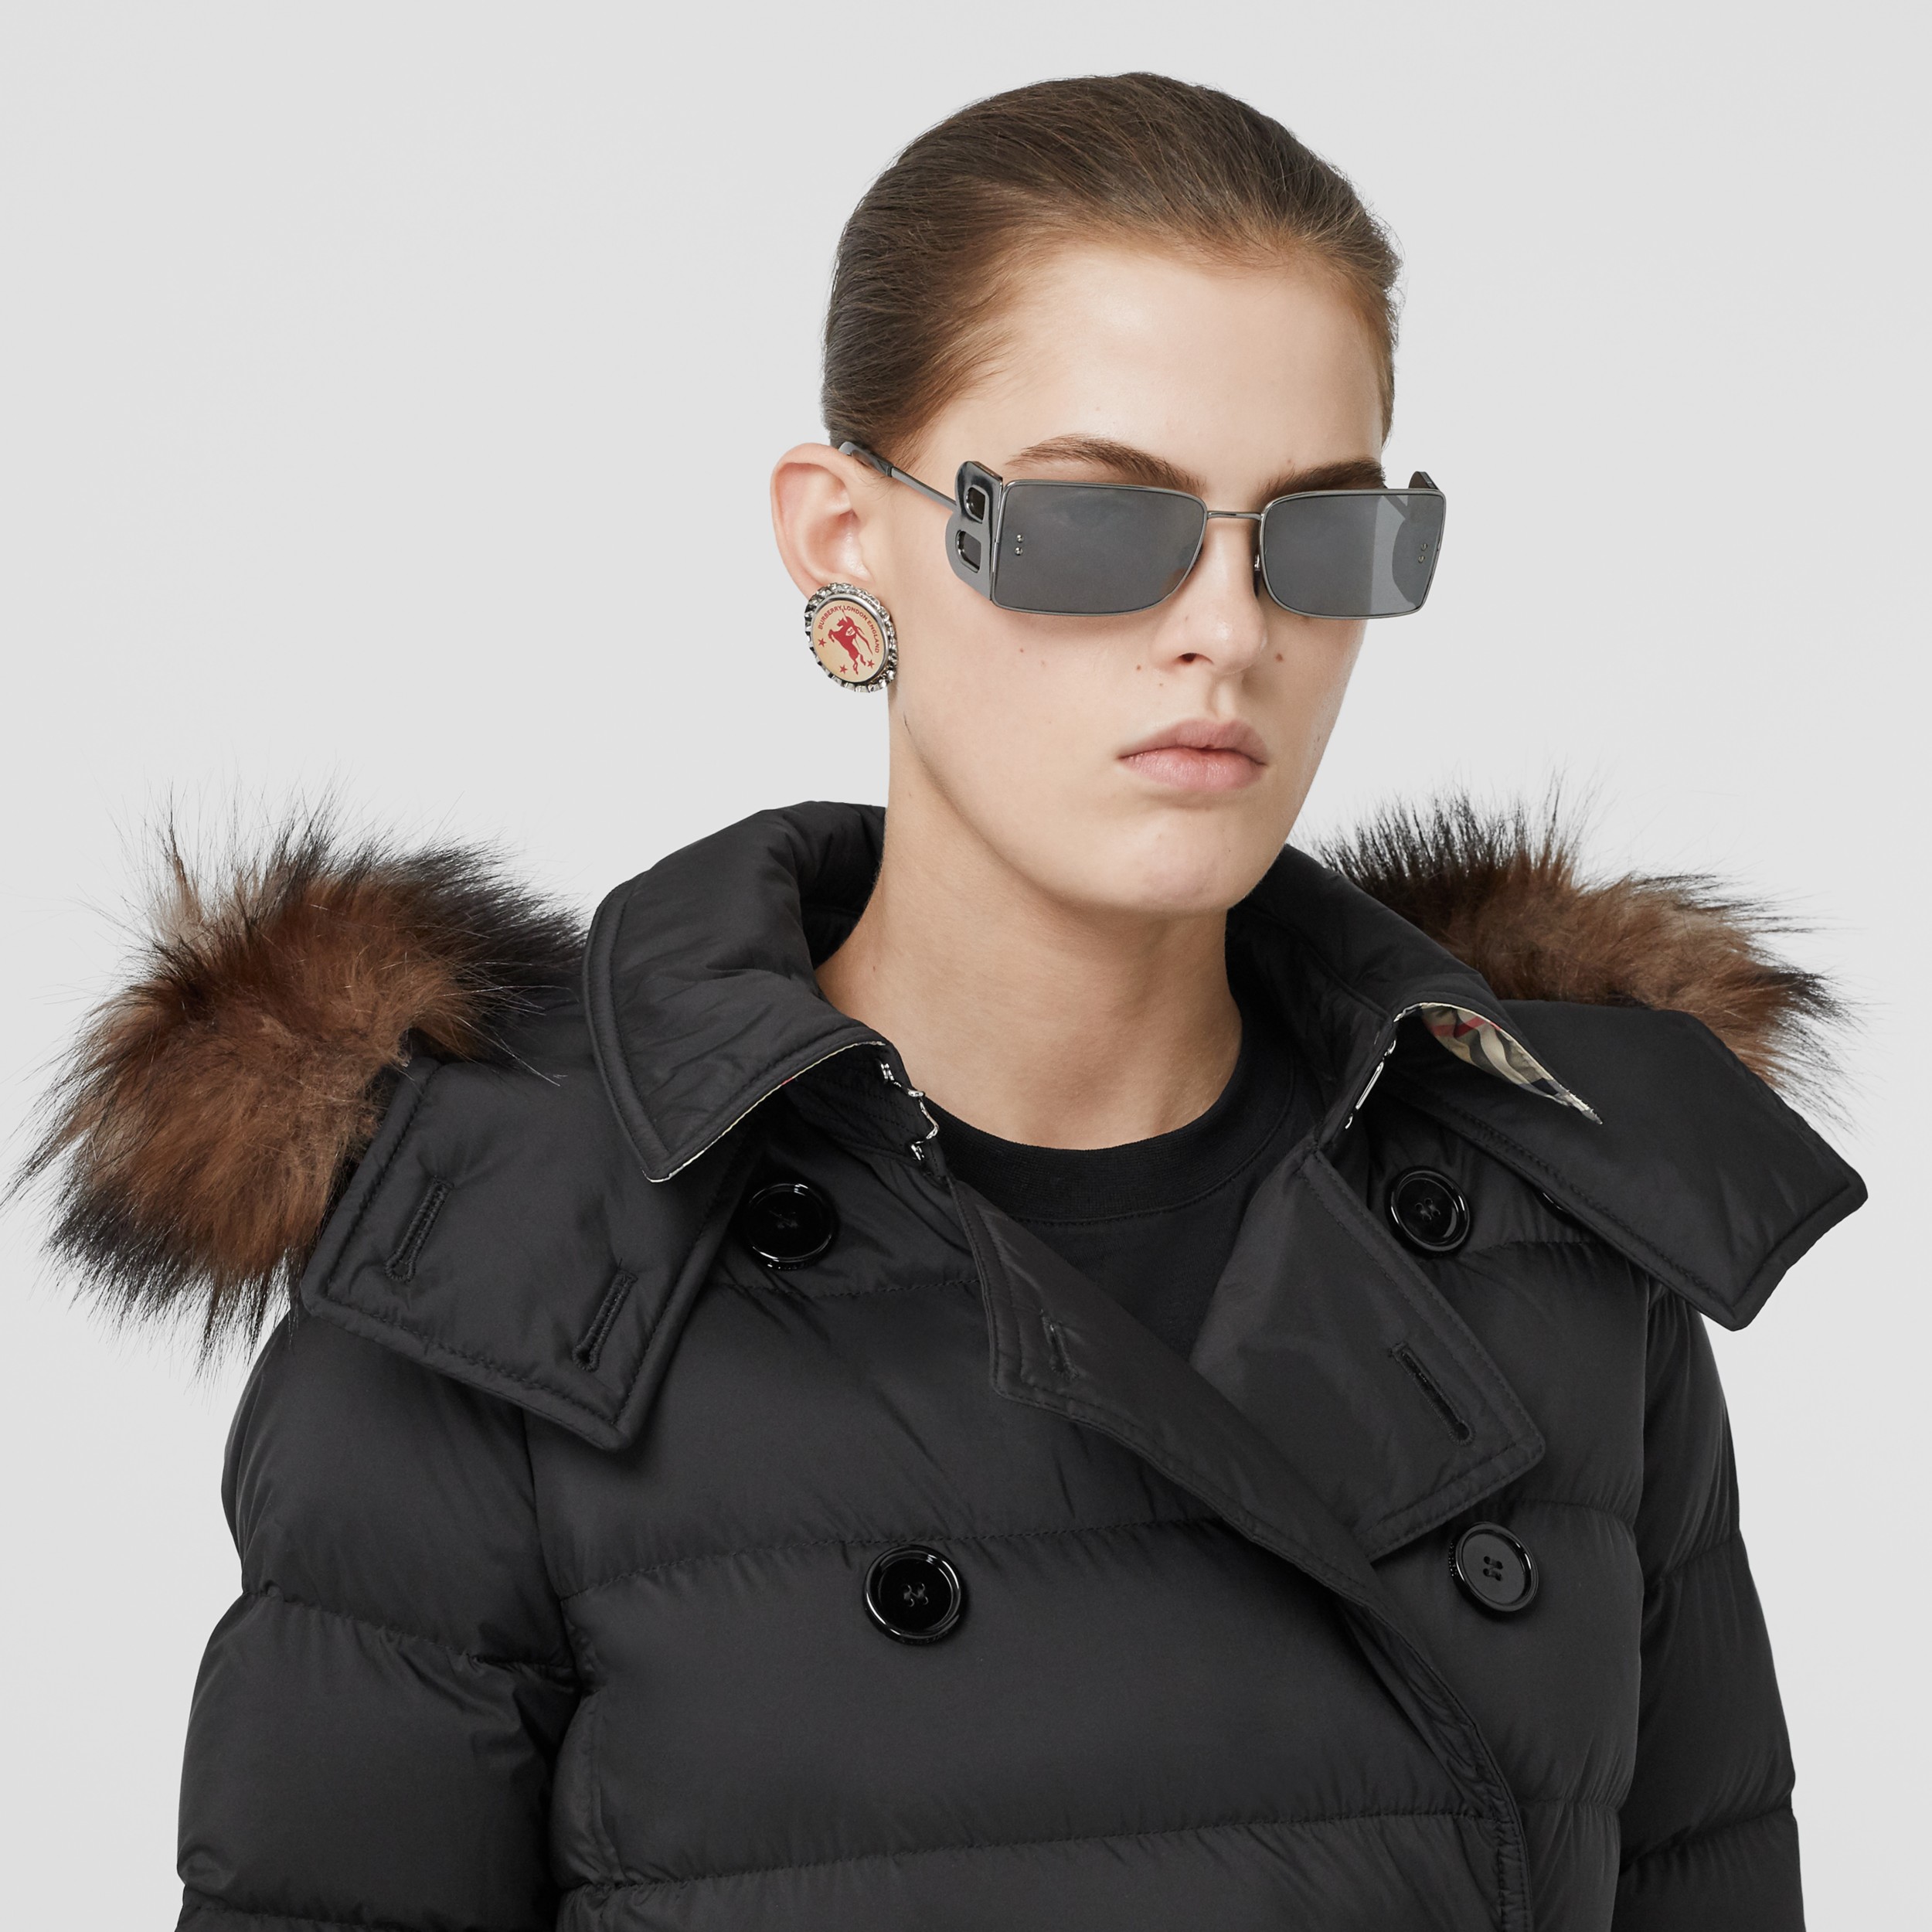 Detachable Hood Down-filled Coat in Black - Women | Burberry United States